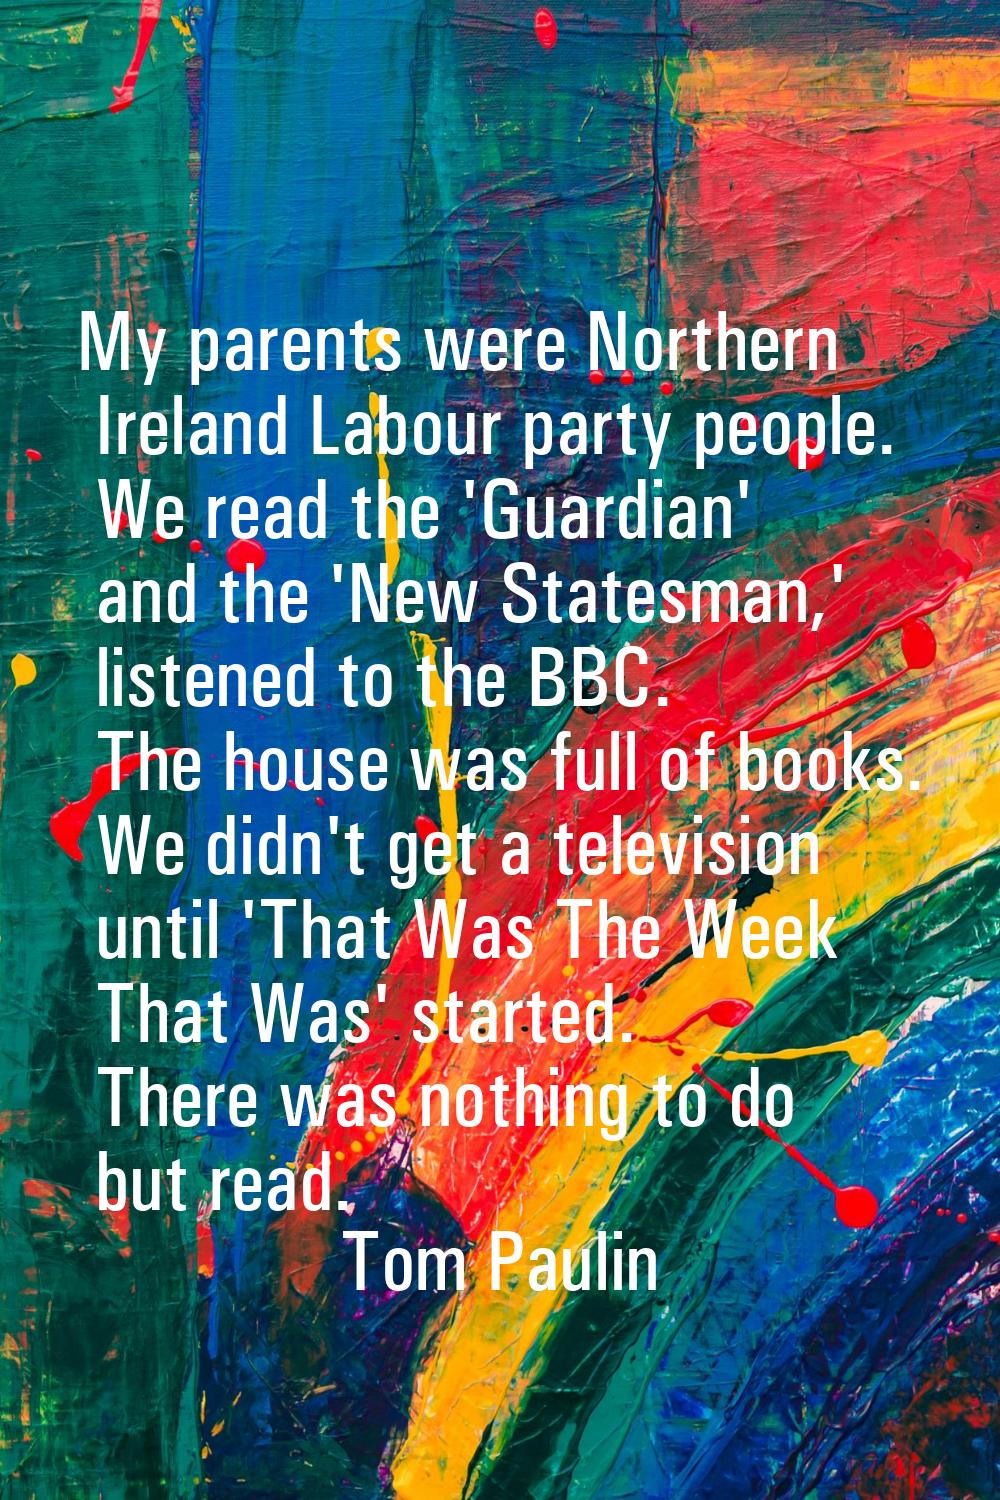 My parents were Northern Ireland Labour party people. We read the 'Guardian' and the 'New Statesman